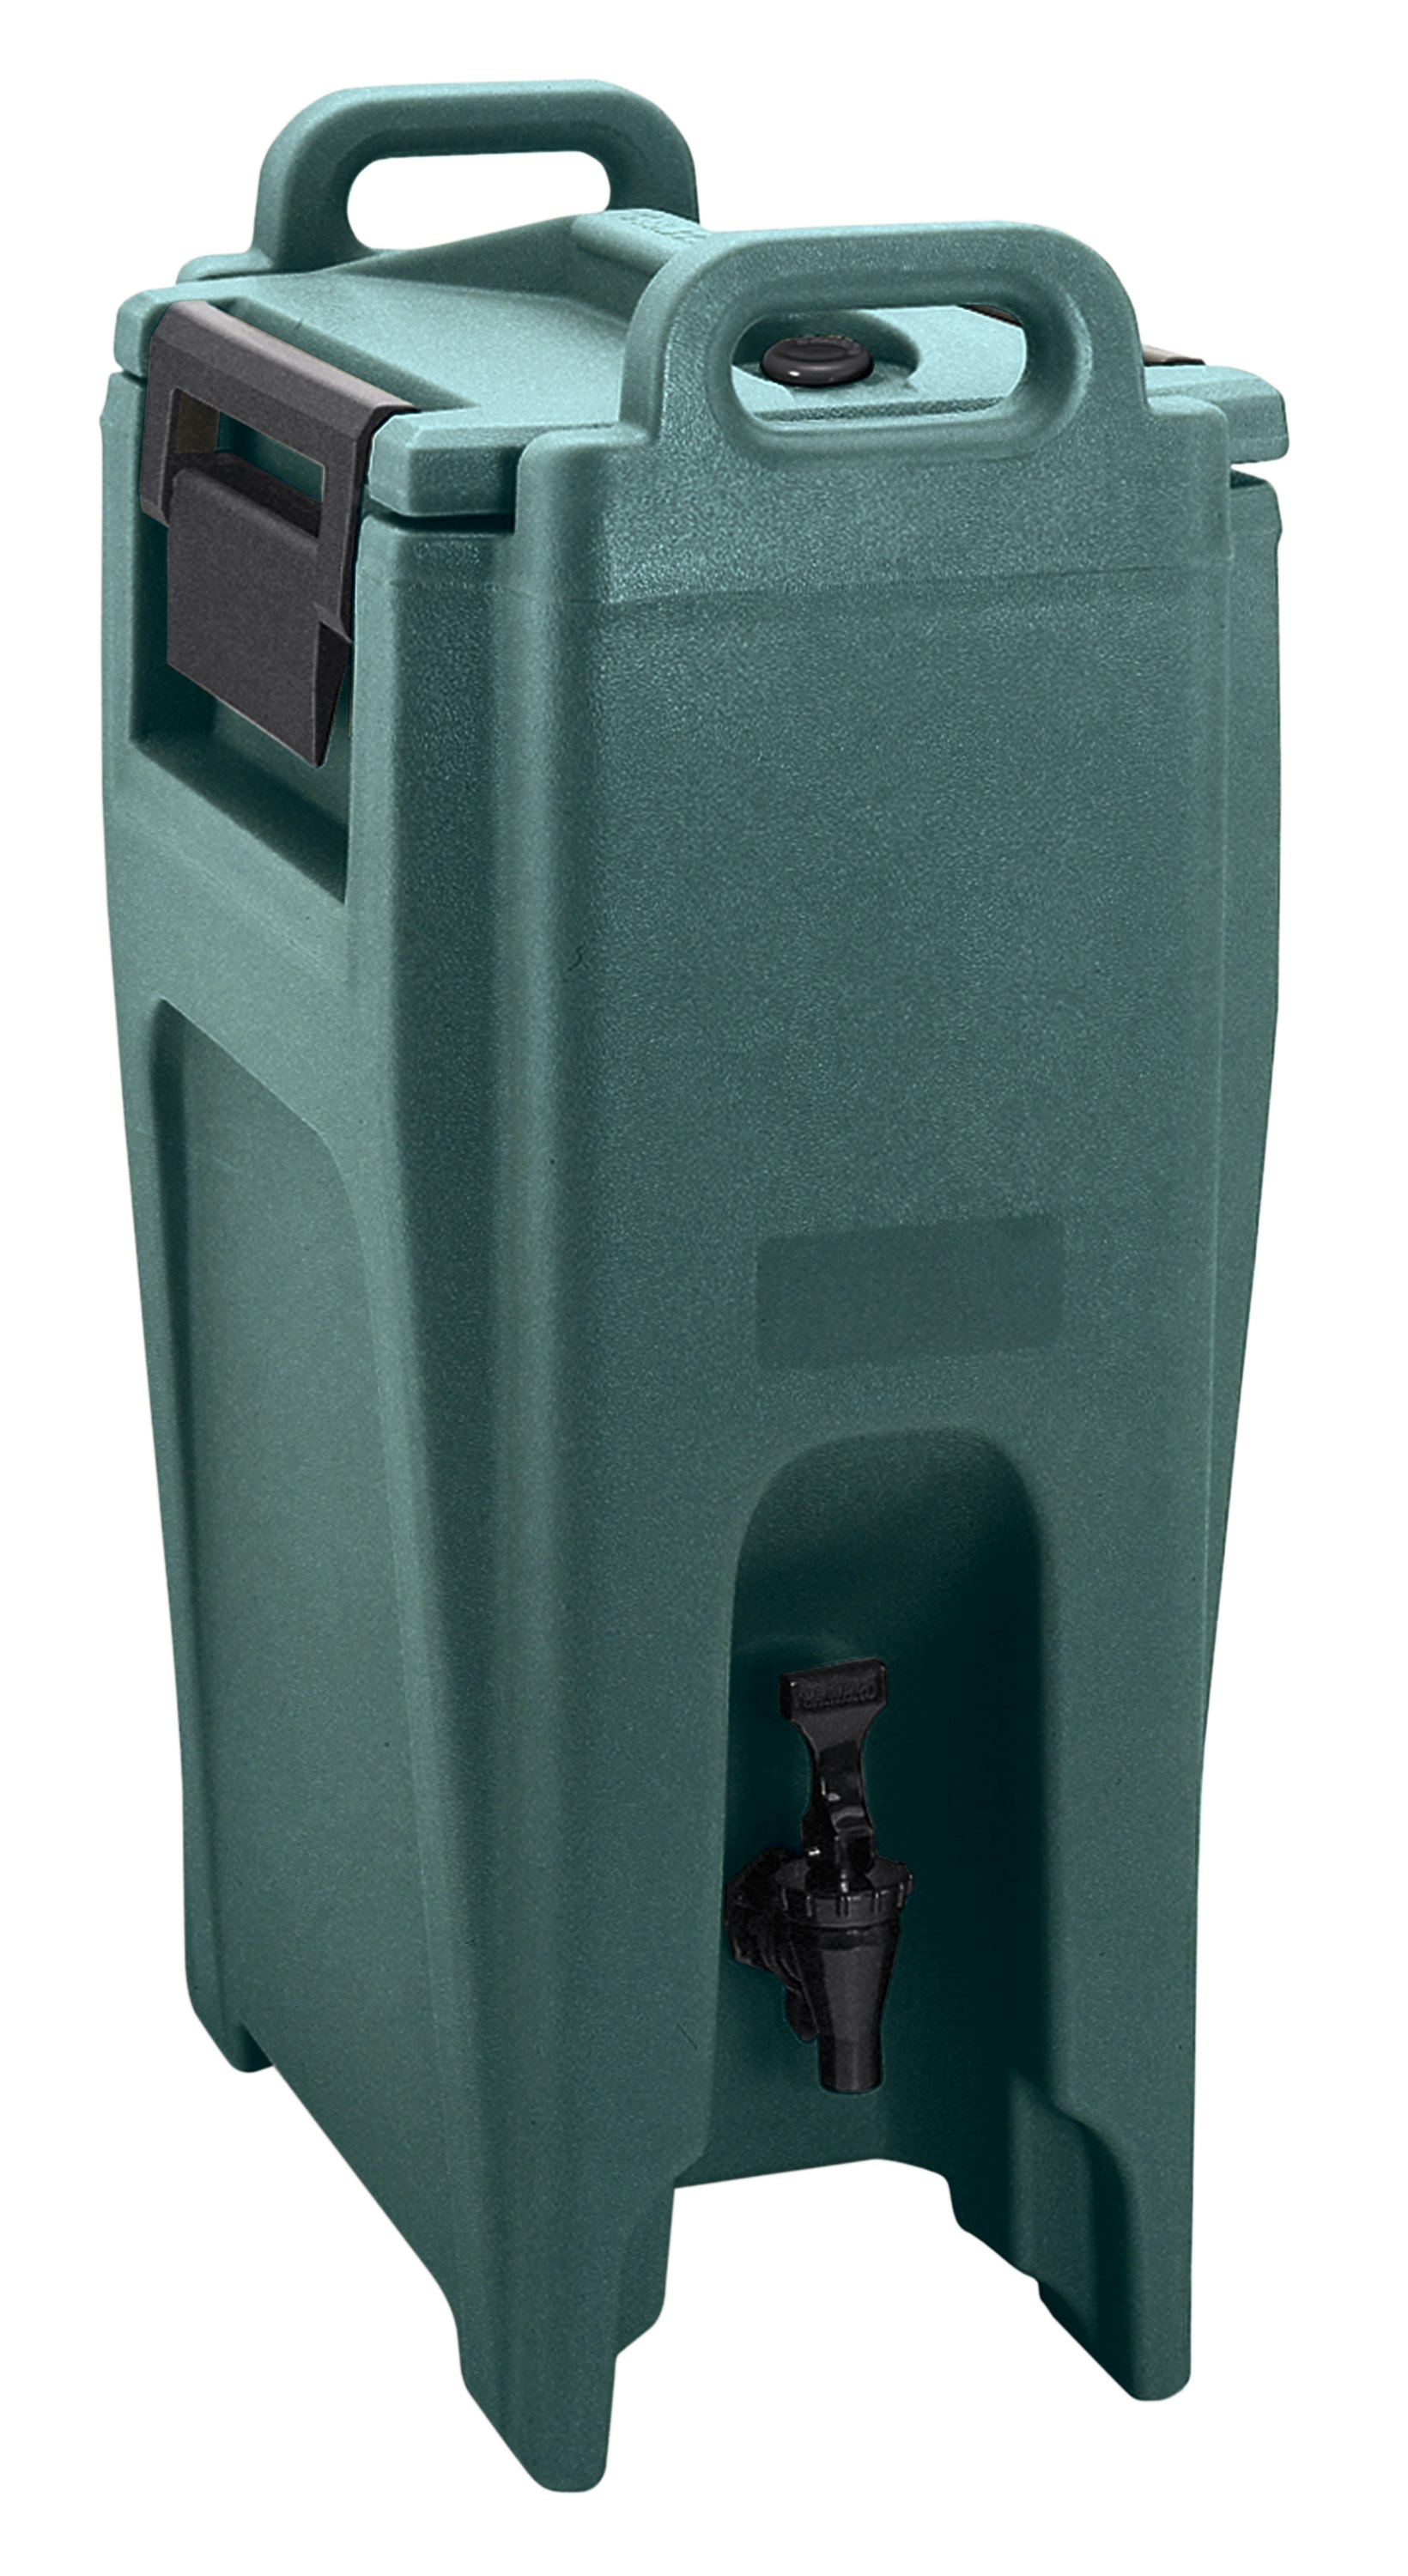 Large Insulated Beverage Dispensers - Ultra Camtainers® | Cambro